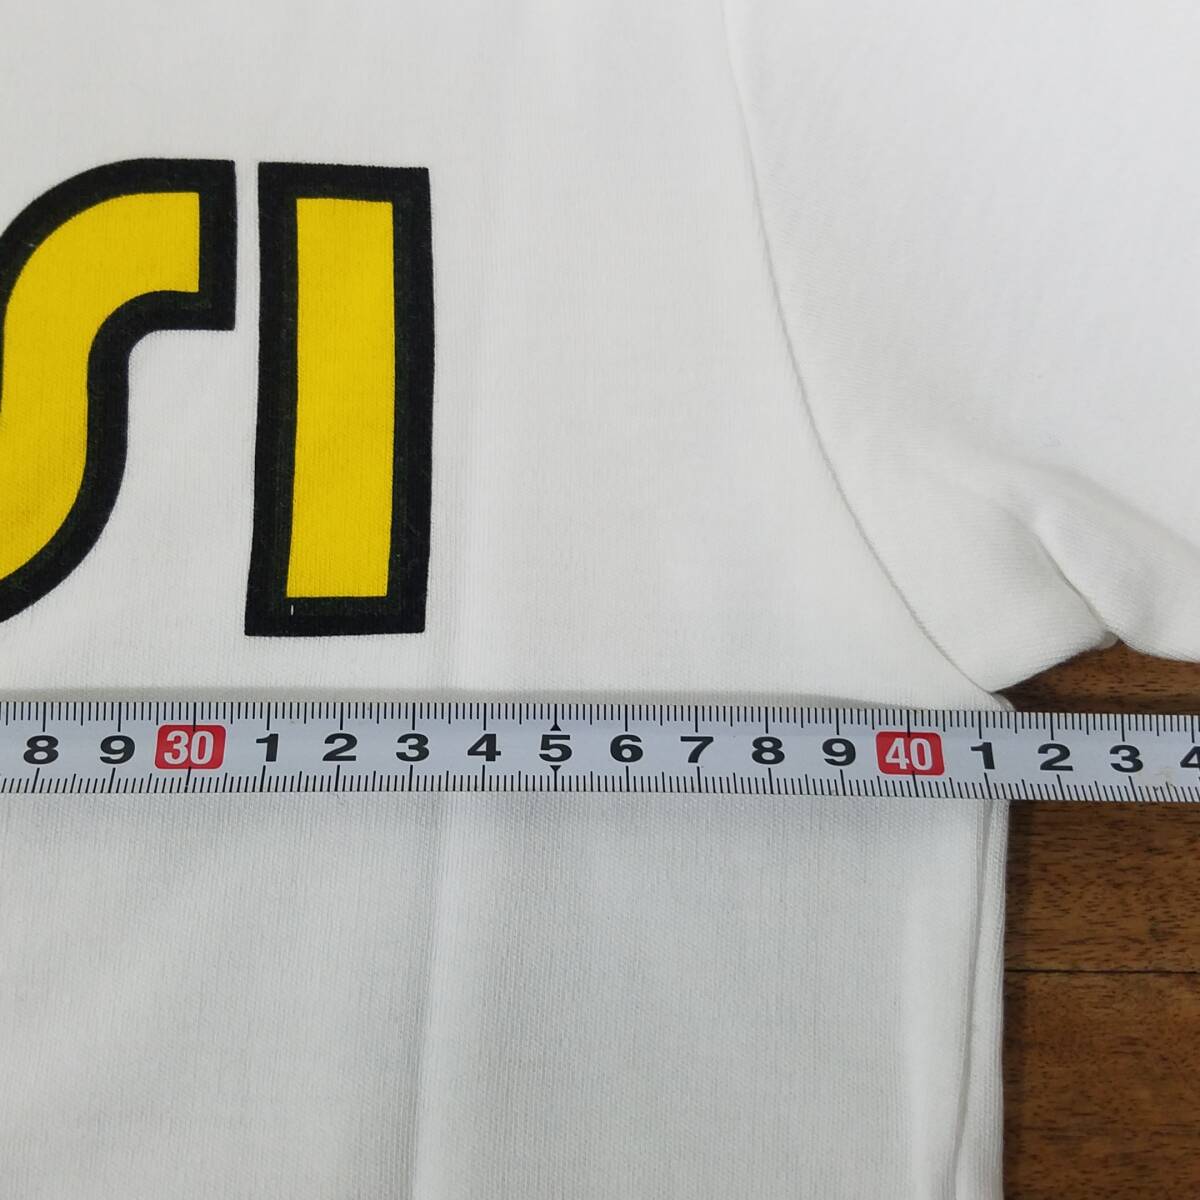 masi Tシャツ(М)　MADE IN JAPAN PEARL IZUMI CYCLE WEAR 　New Old Stock (NOS) 未使用品 ビンテージ_画像5